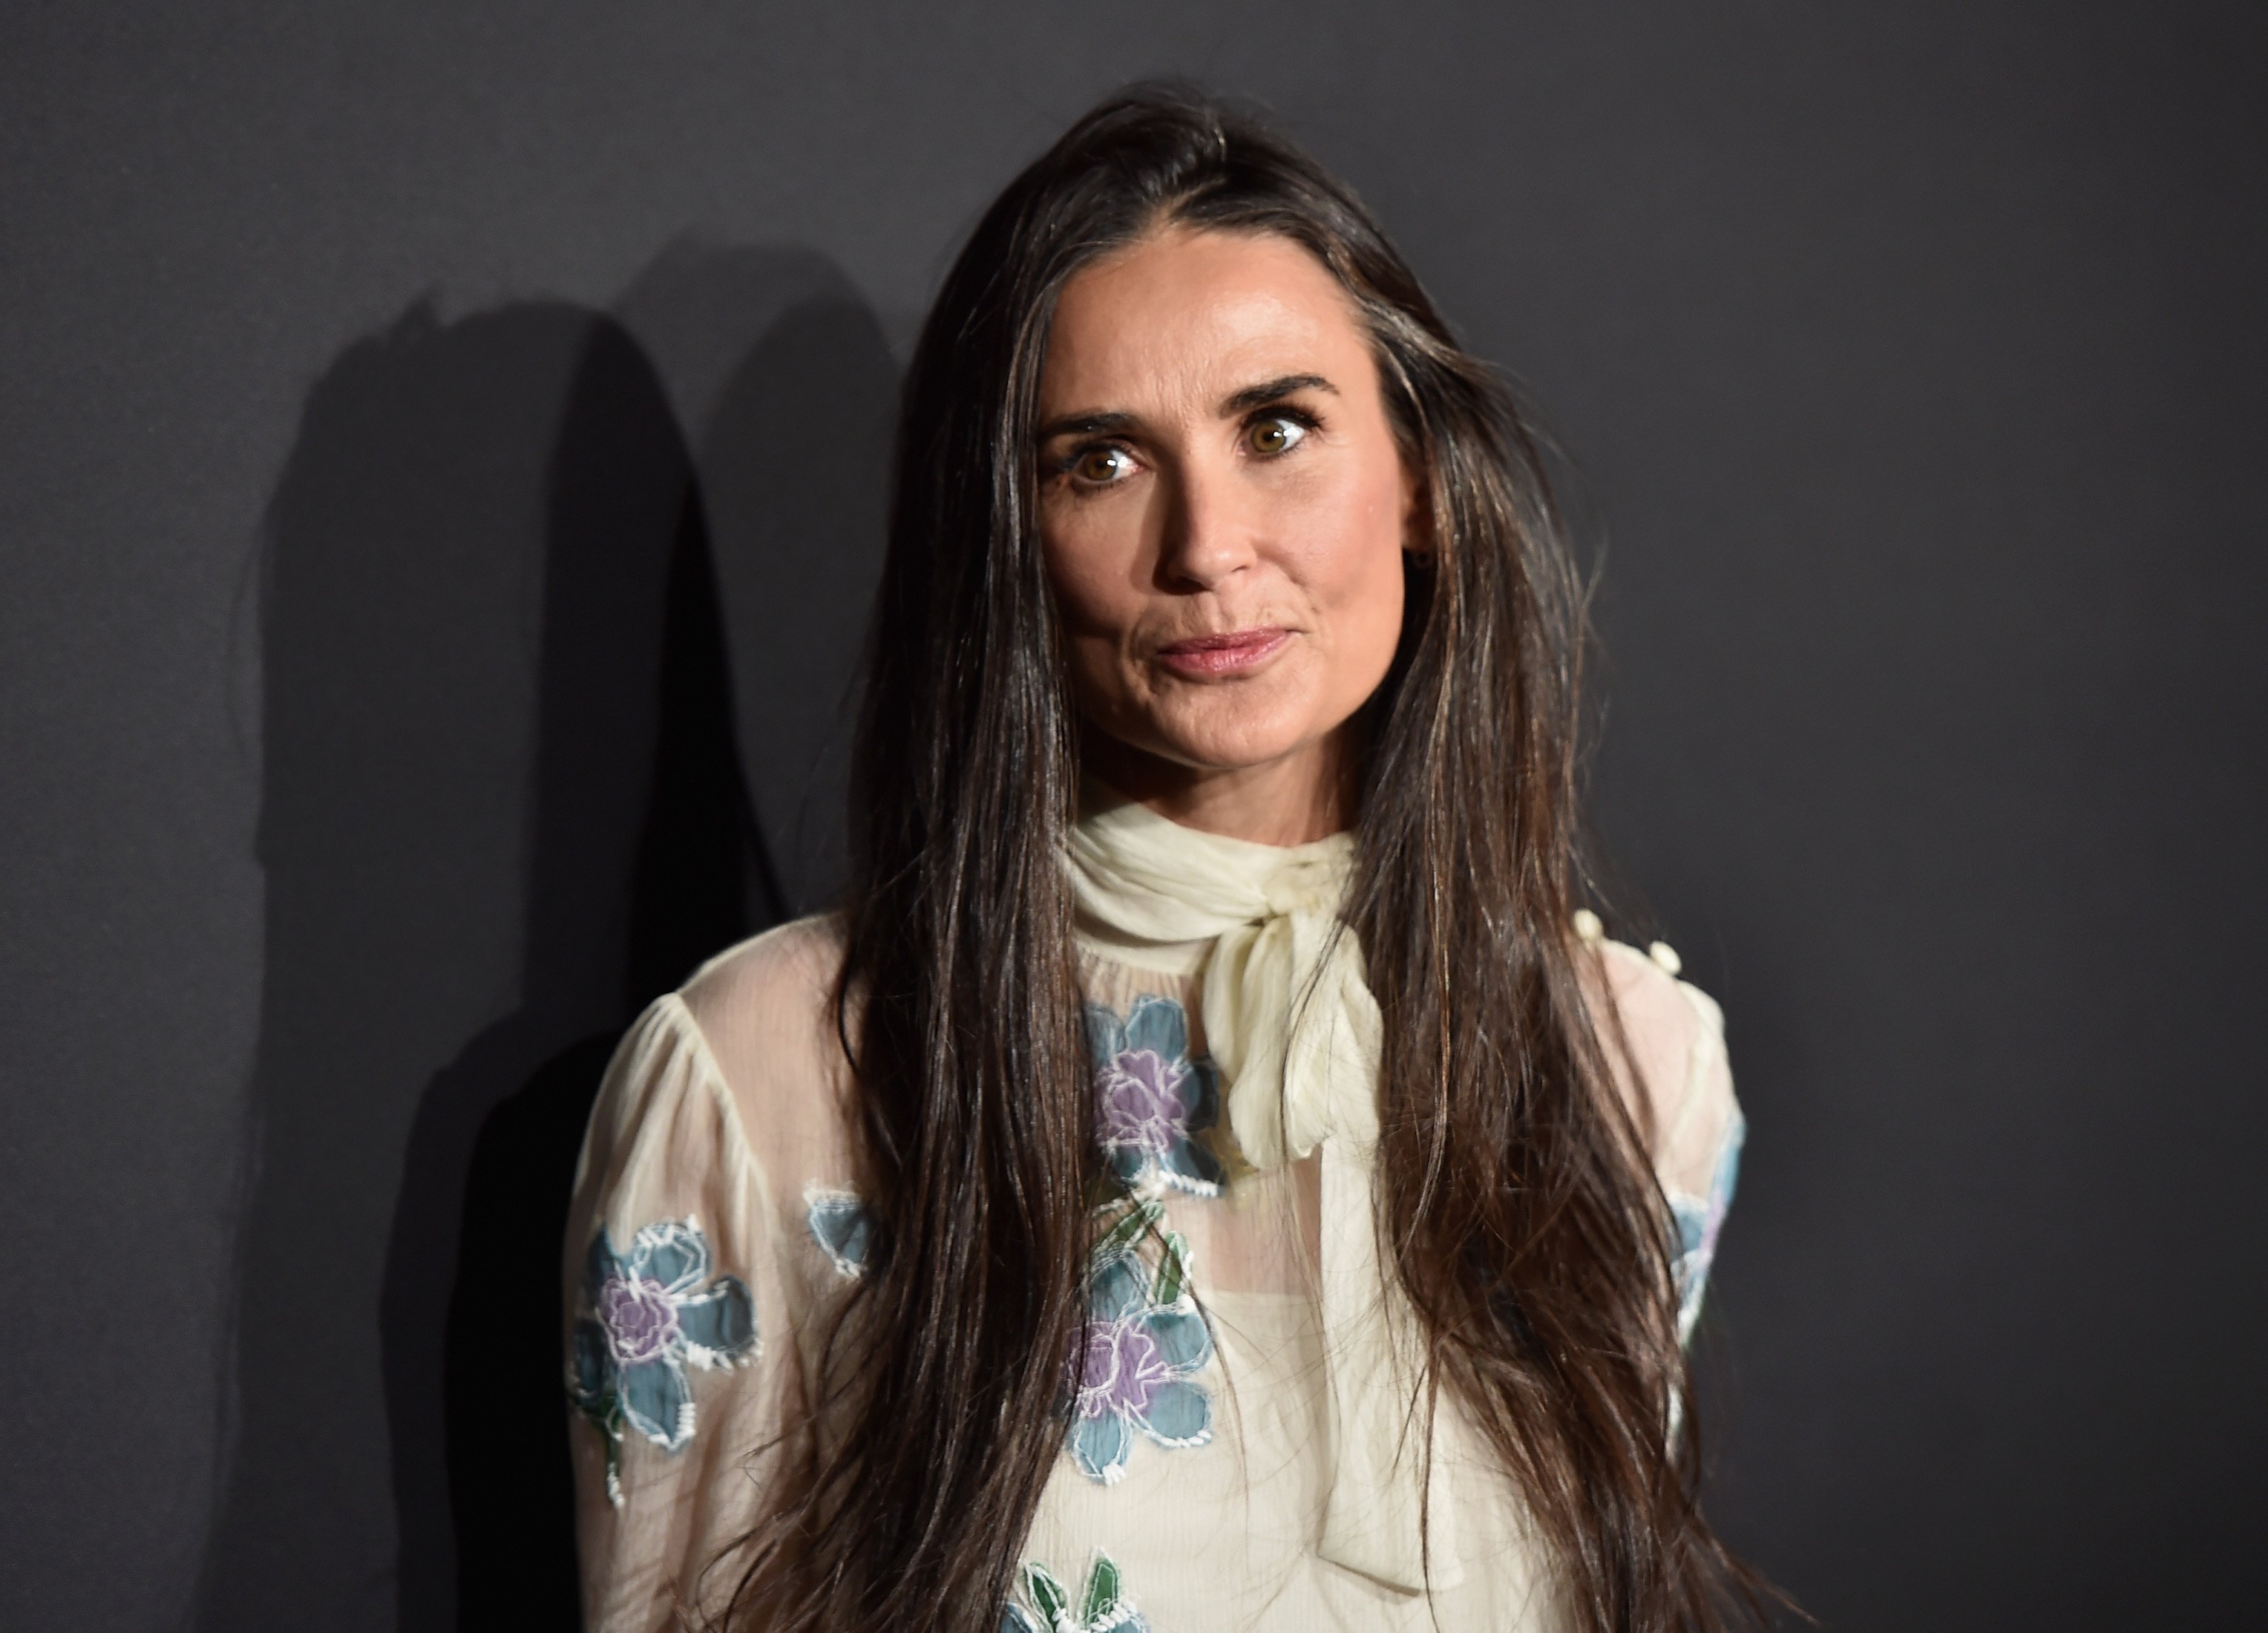 "Striptease" star Demi Moore attends the 2016 Prada's "Past Forward" event at the Hauser Wirth & Schimmel in Los Angeles, California. | Photo: Getty Images